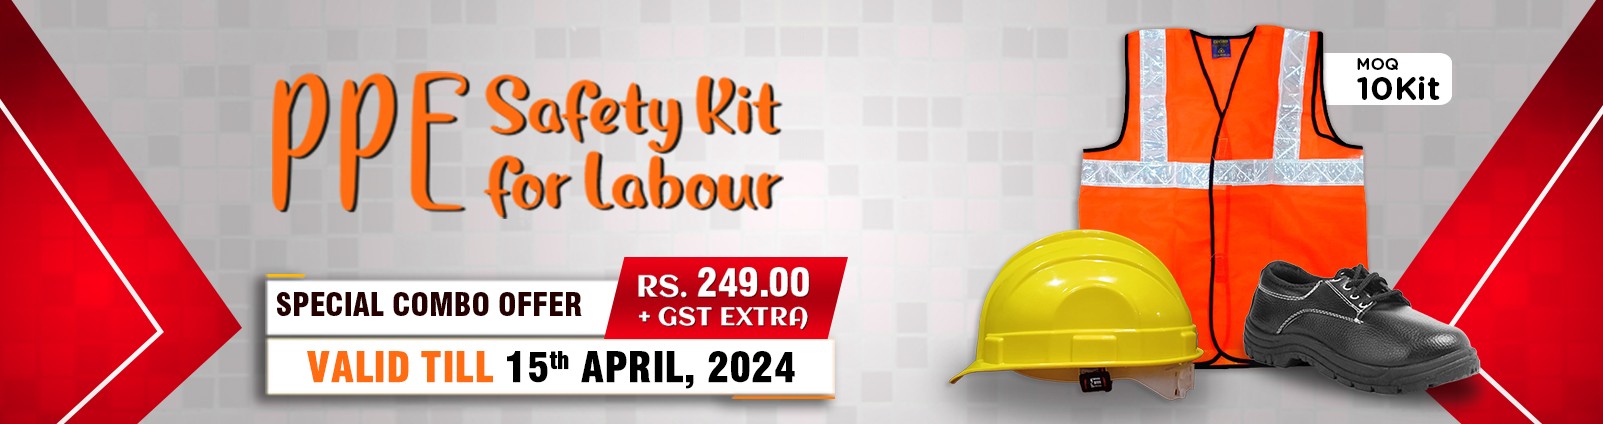 PPE'S Safety Kit For Labour